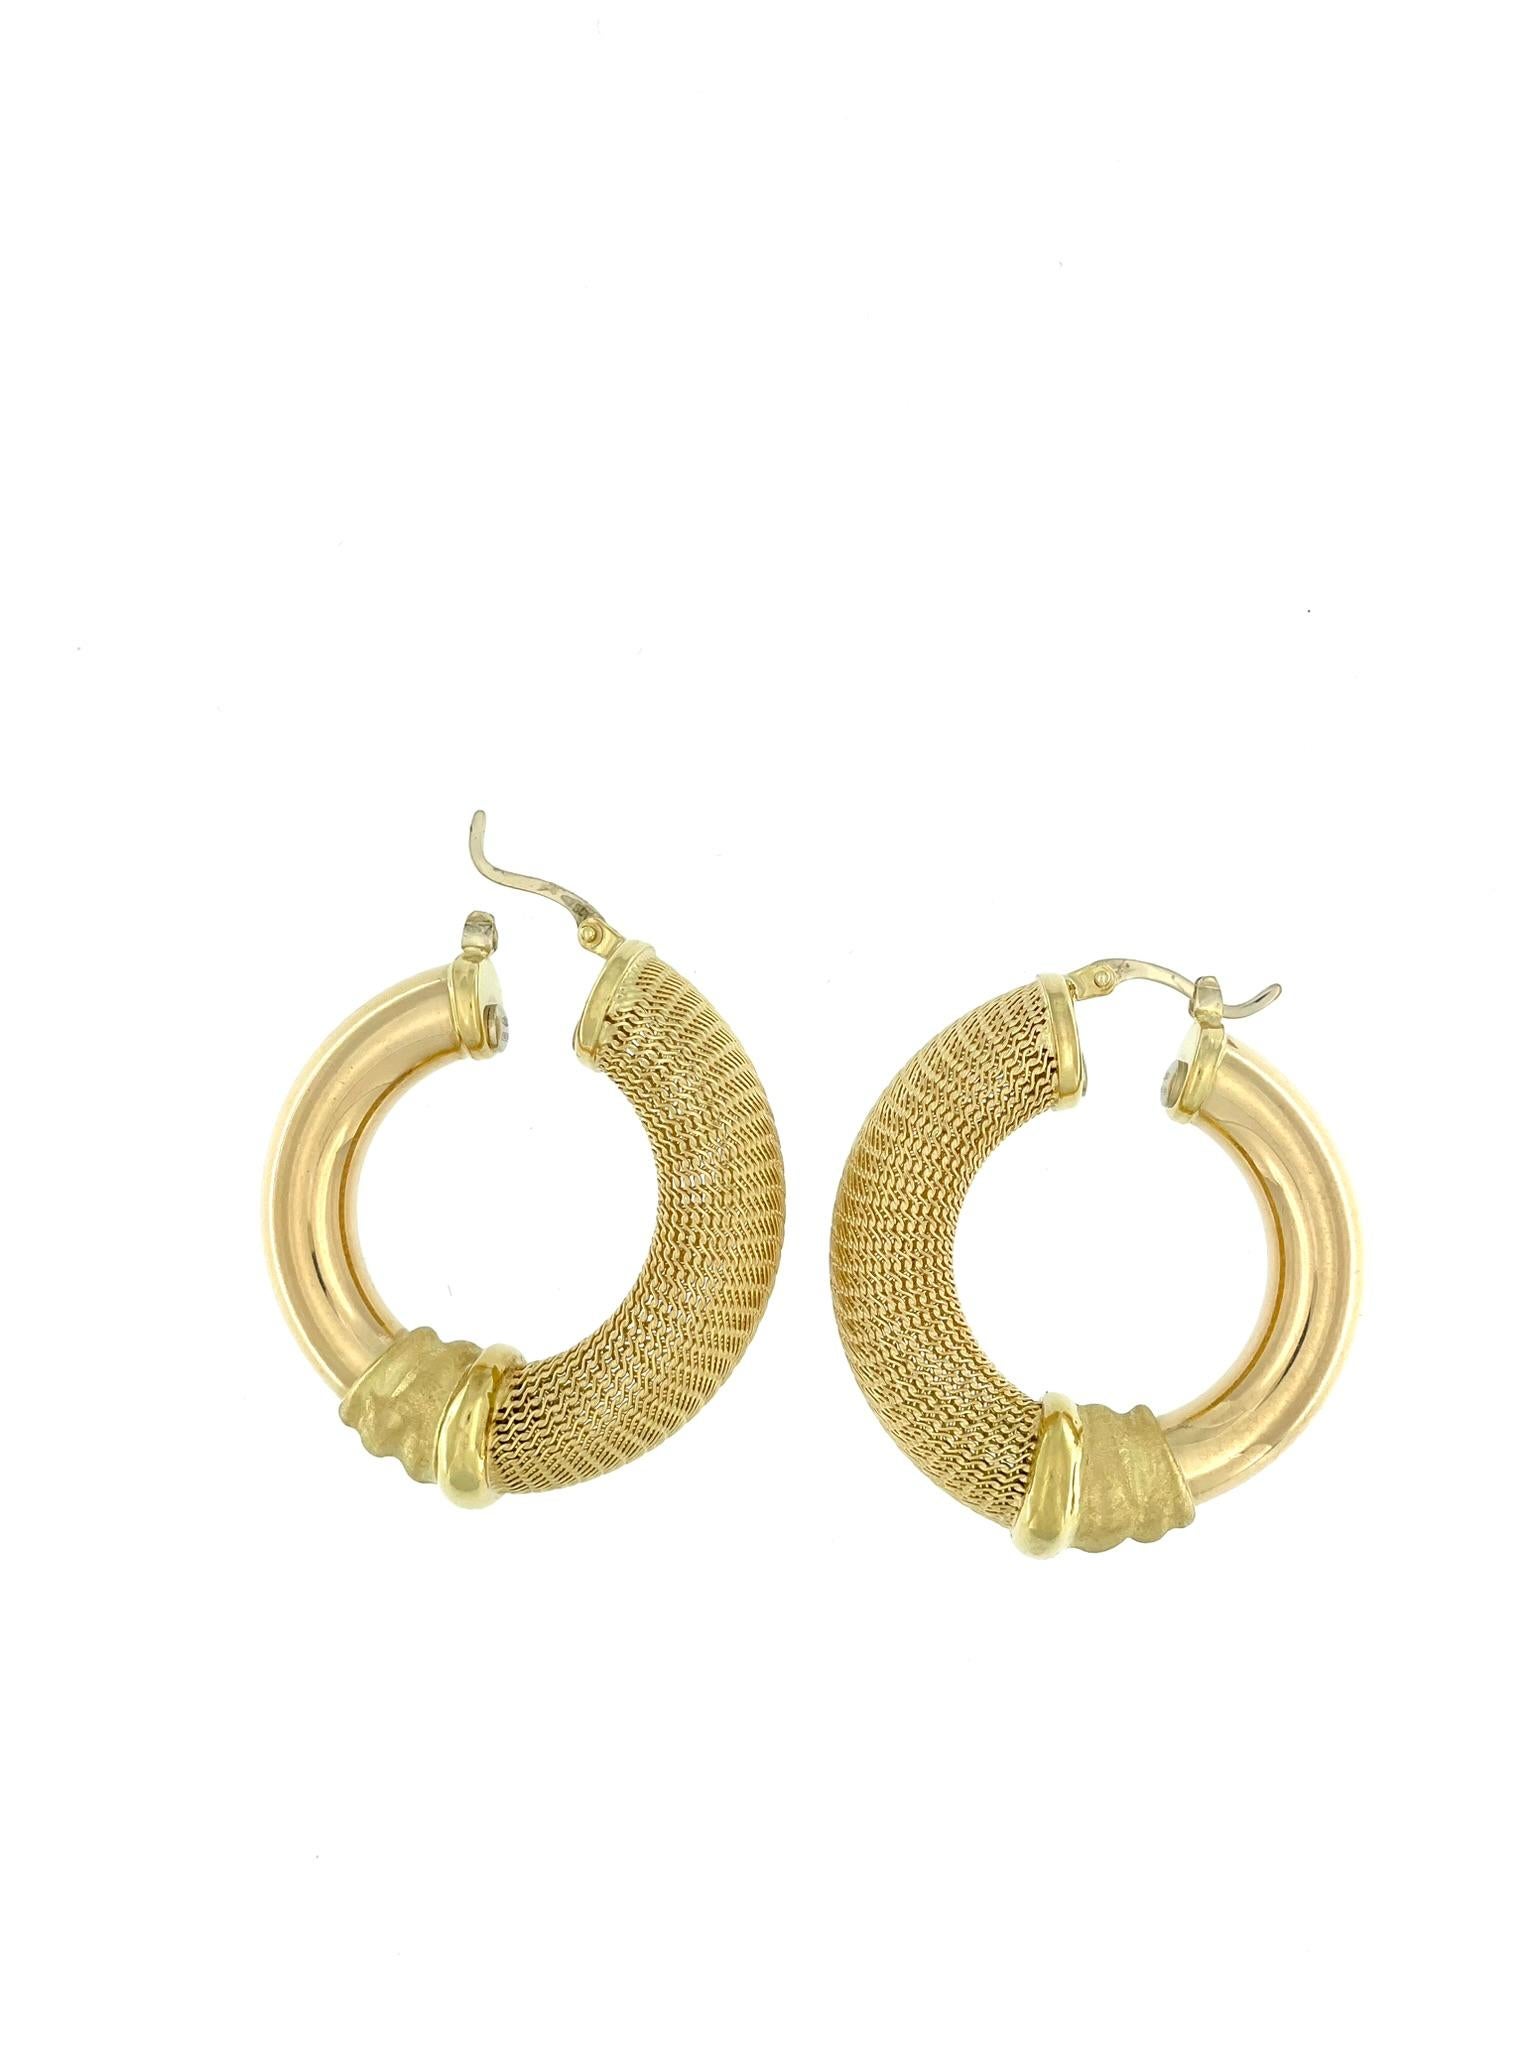 The Galma&Cordif Modern Italian 18 karat Yellow Gold Earrings are a testament to contemporary Italian jewelry design, marrying sophistication with intricate craftsmanship. Crafted from luxurious 18 karat yellow gold, these earrings feature a